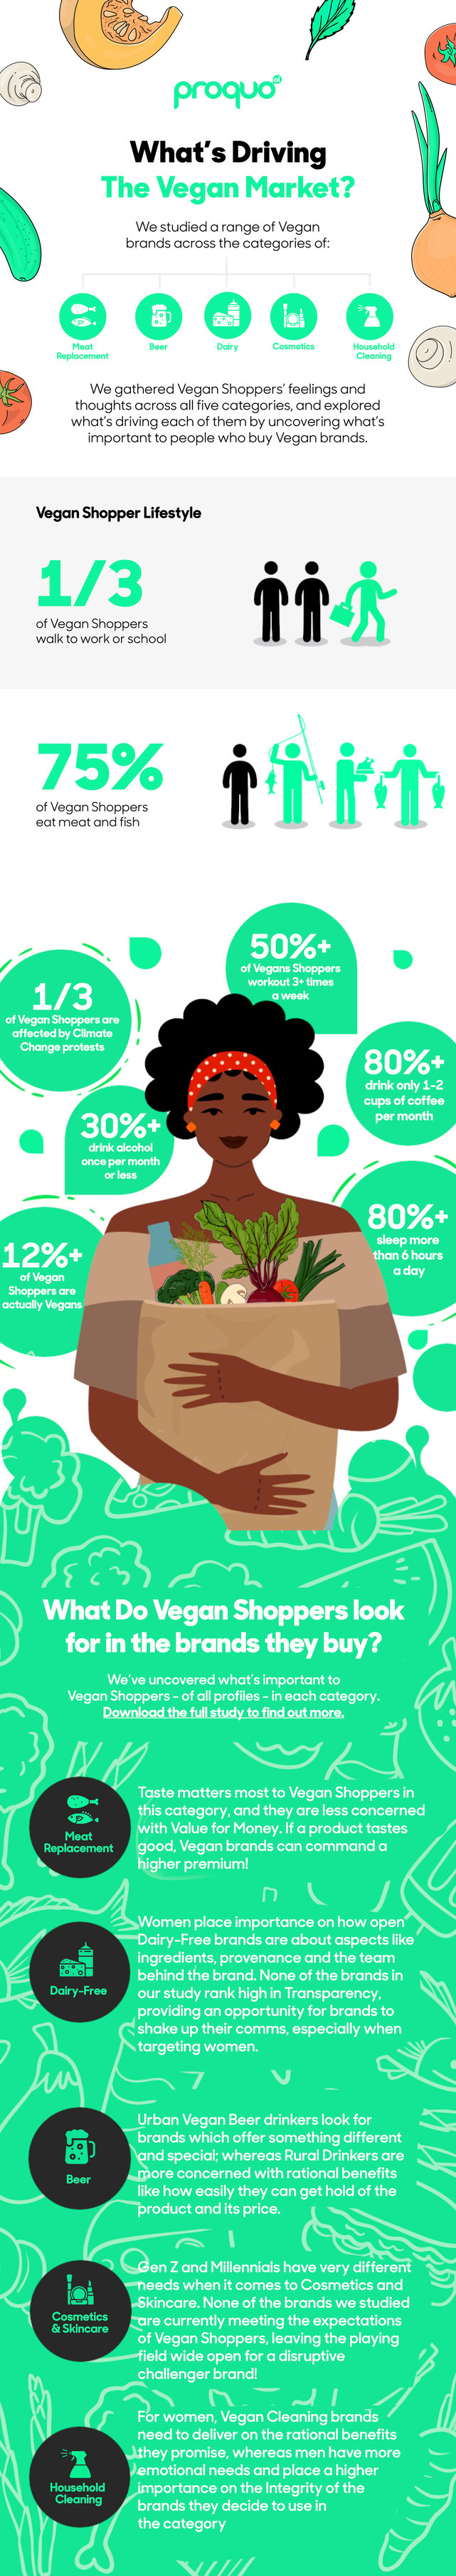 Whats Driving the Vegan Market Infographic